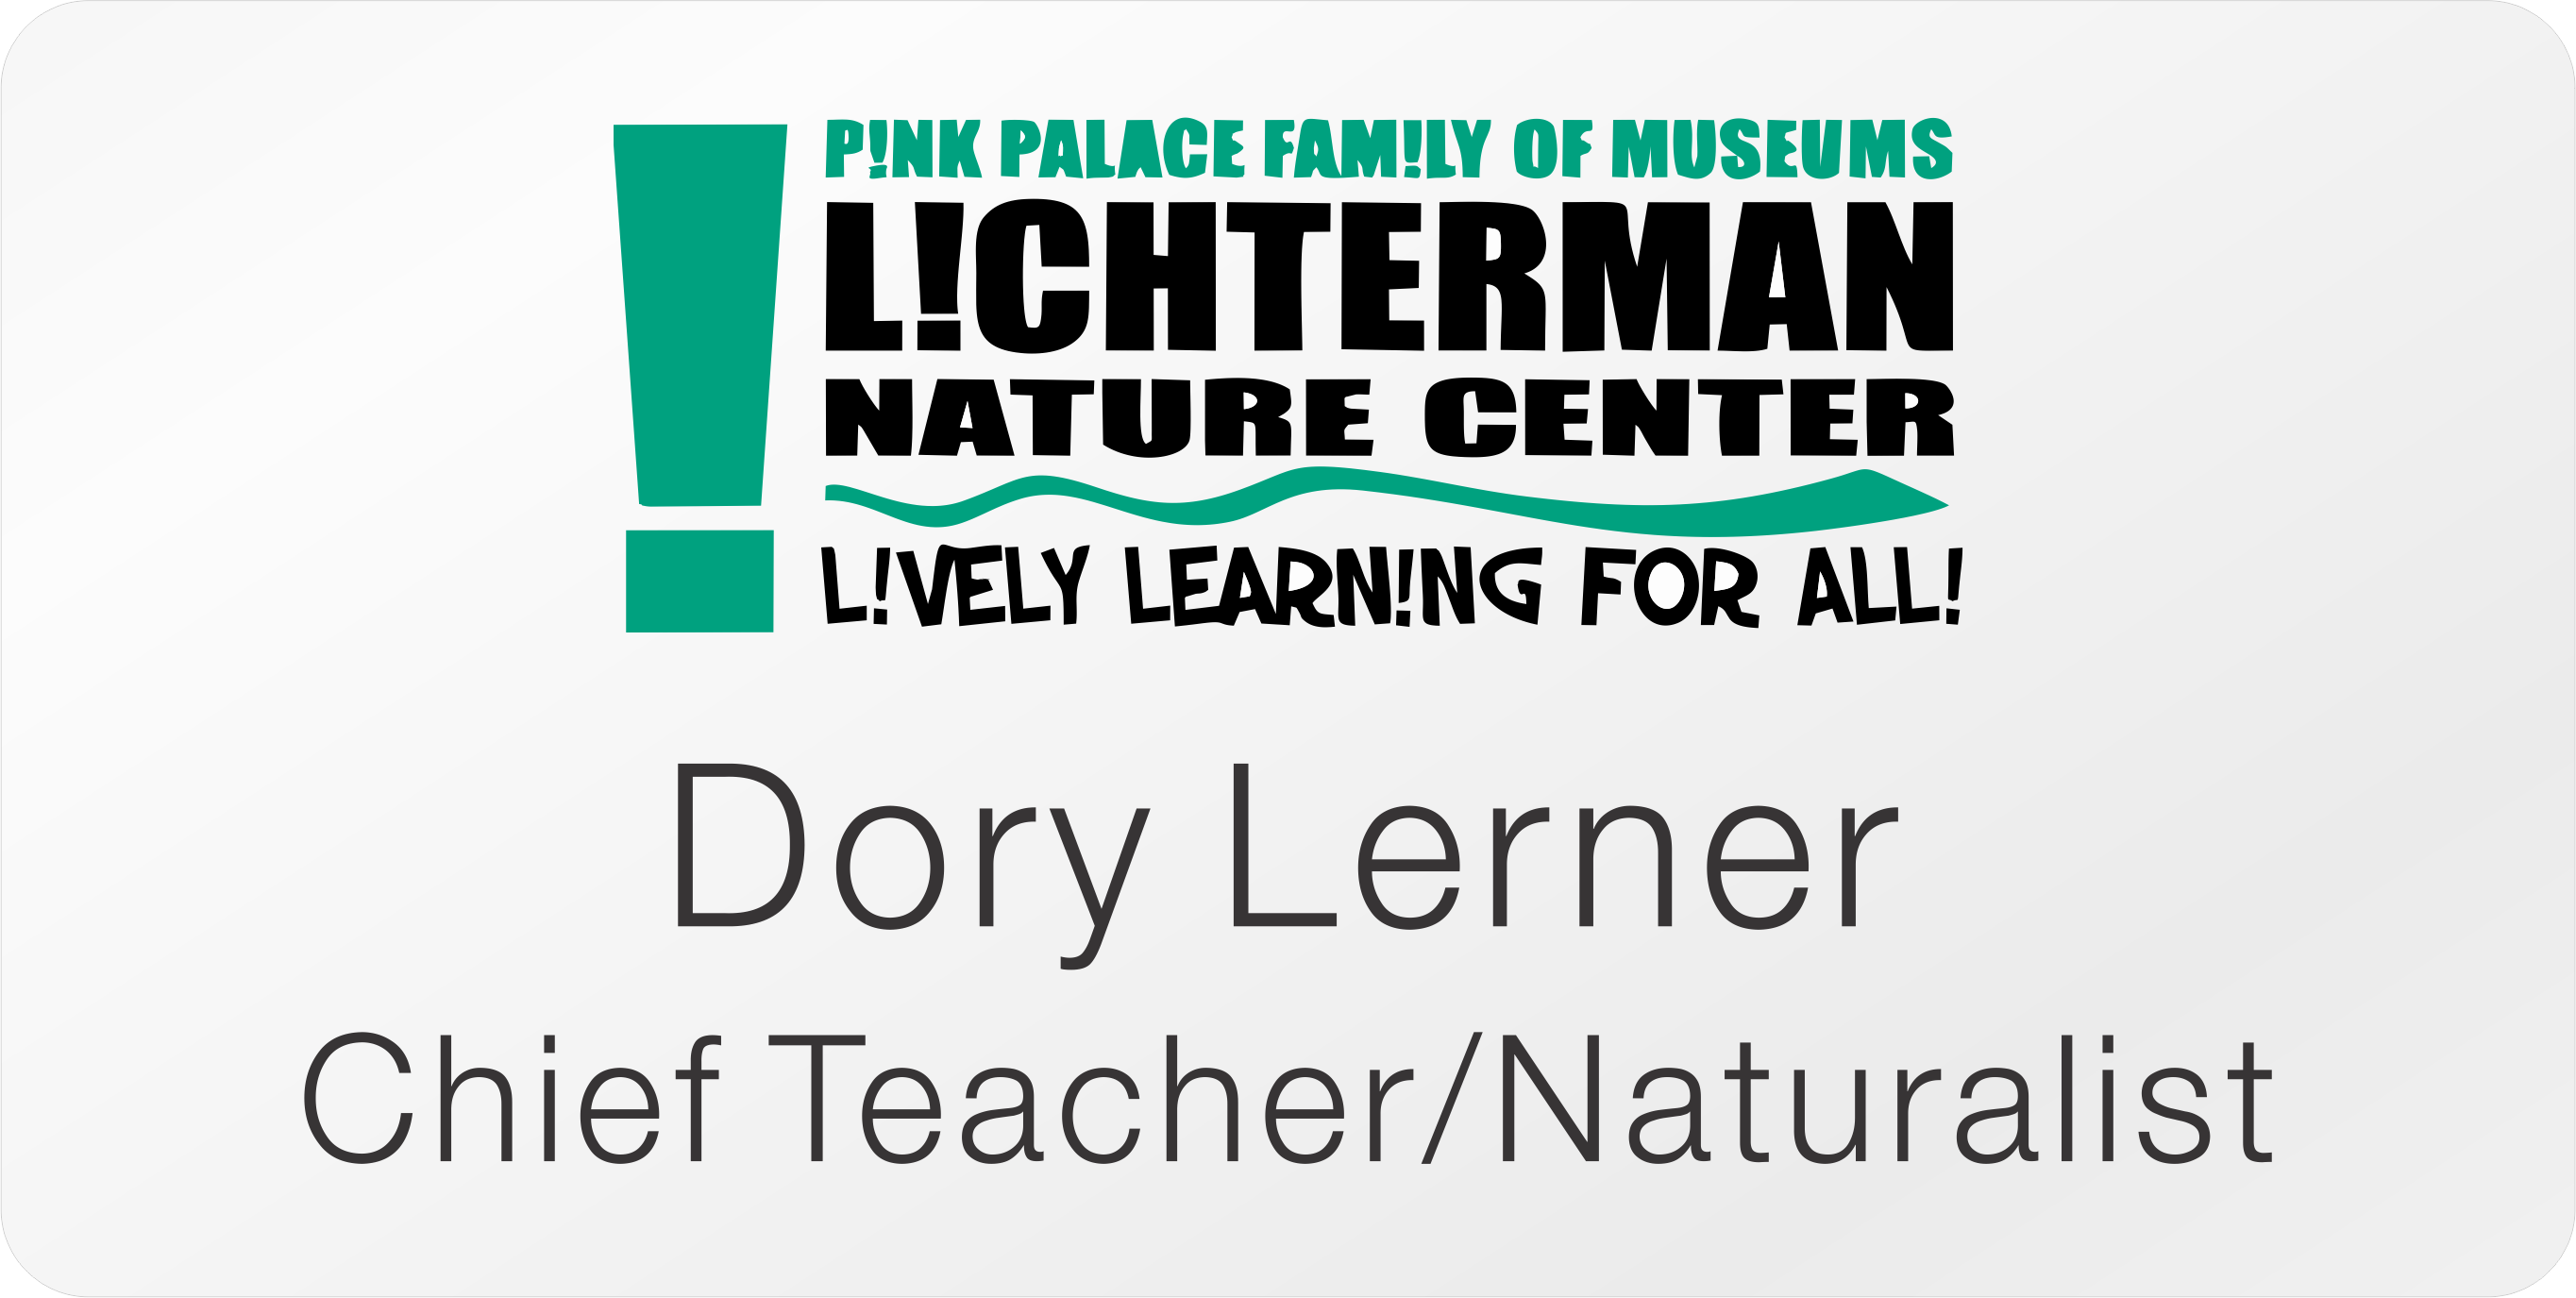 Name badge featuring logo for Lichterman Nature Center